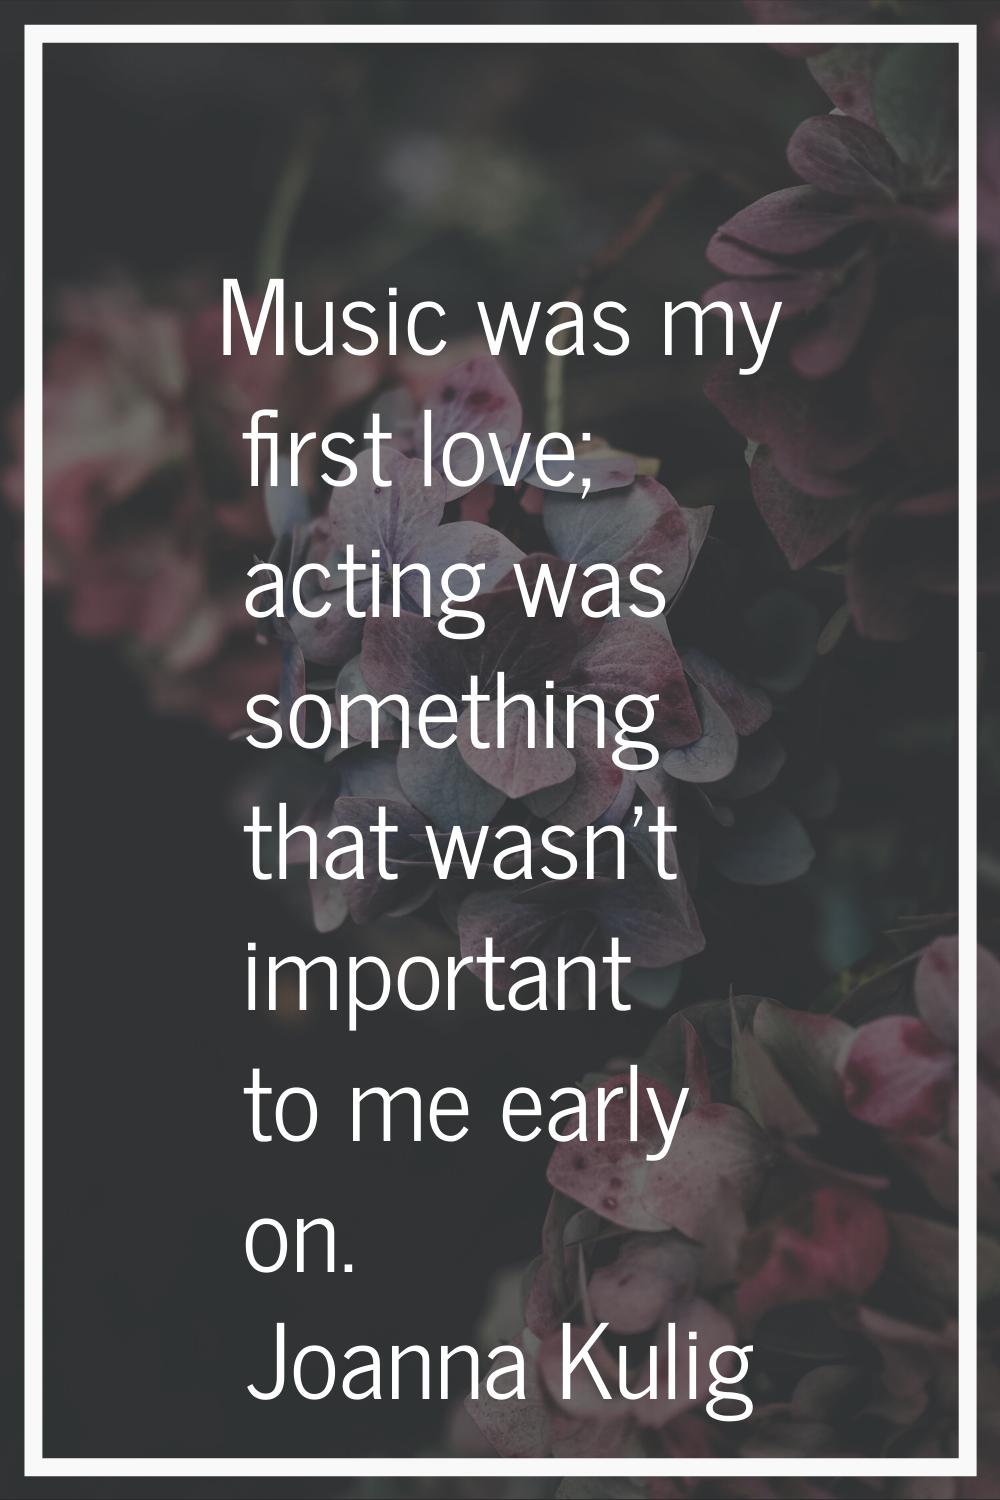 Music was my first love; acting was something that wasn't important to me early on.